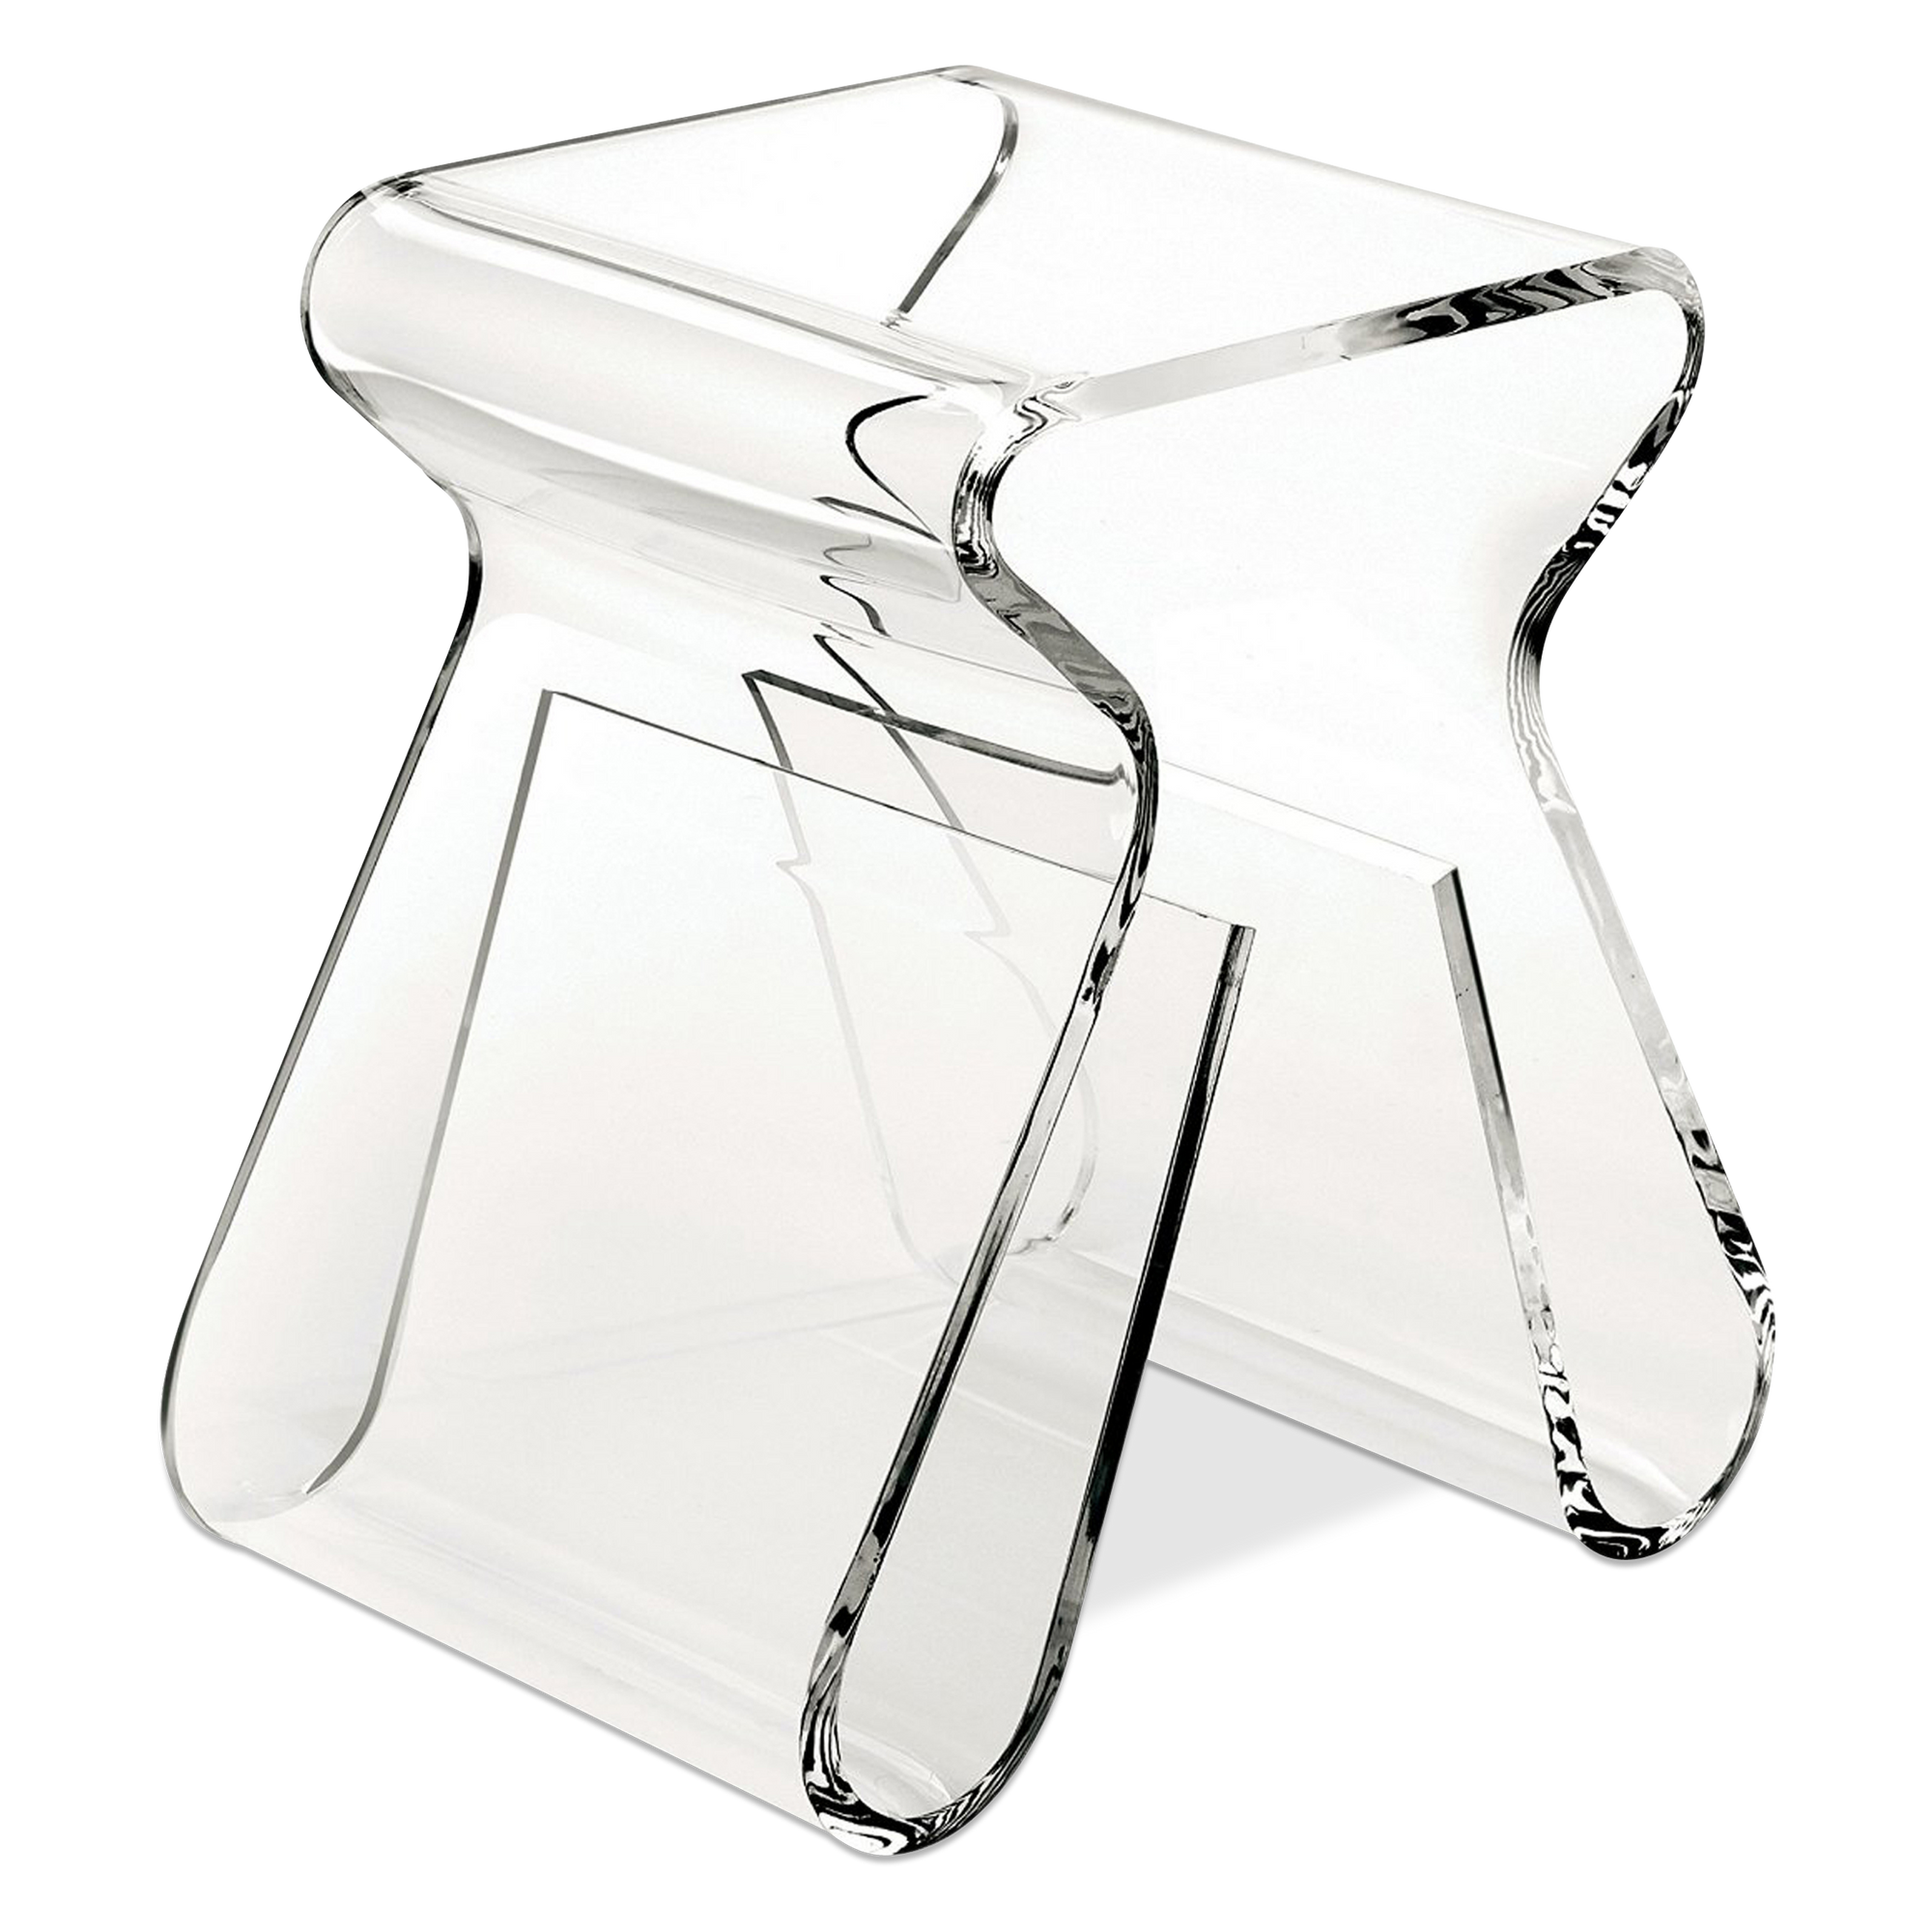 A uniquely designed stool with curves that form a beautiful décor piece.